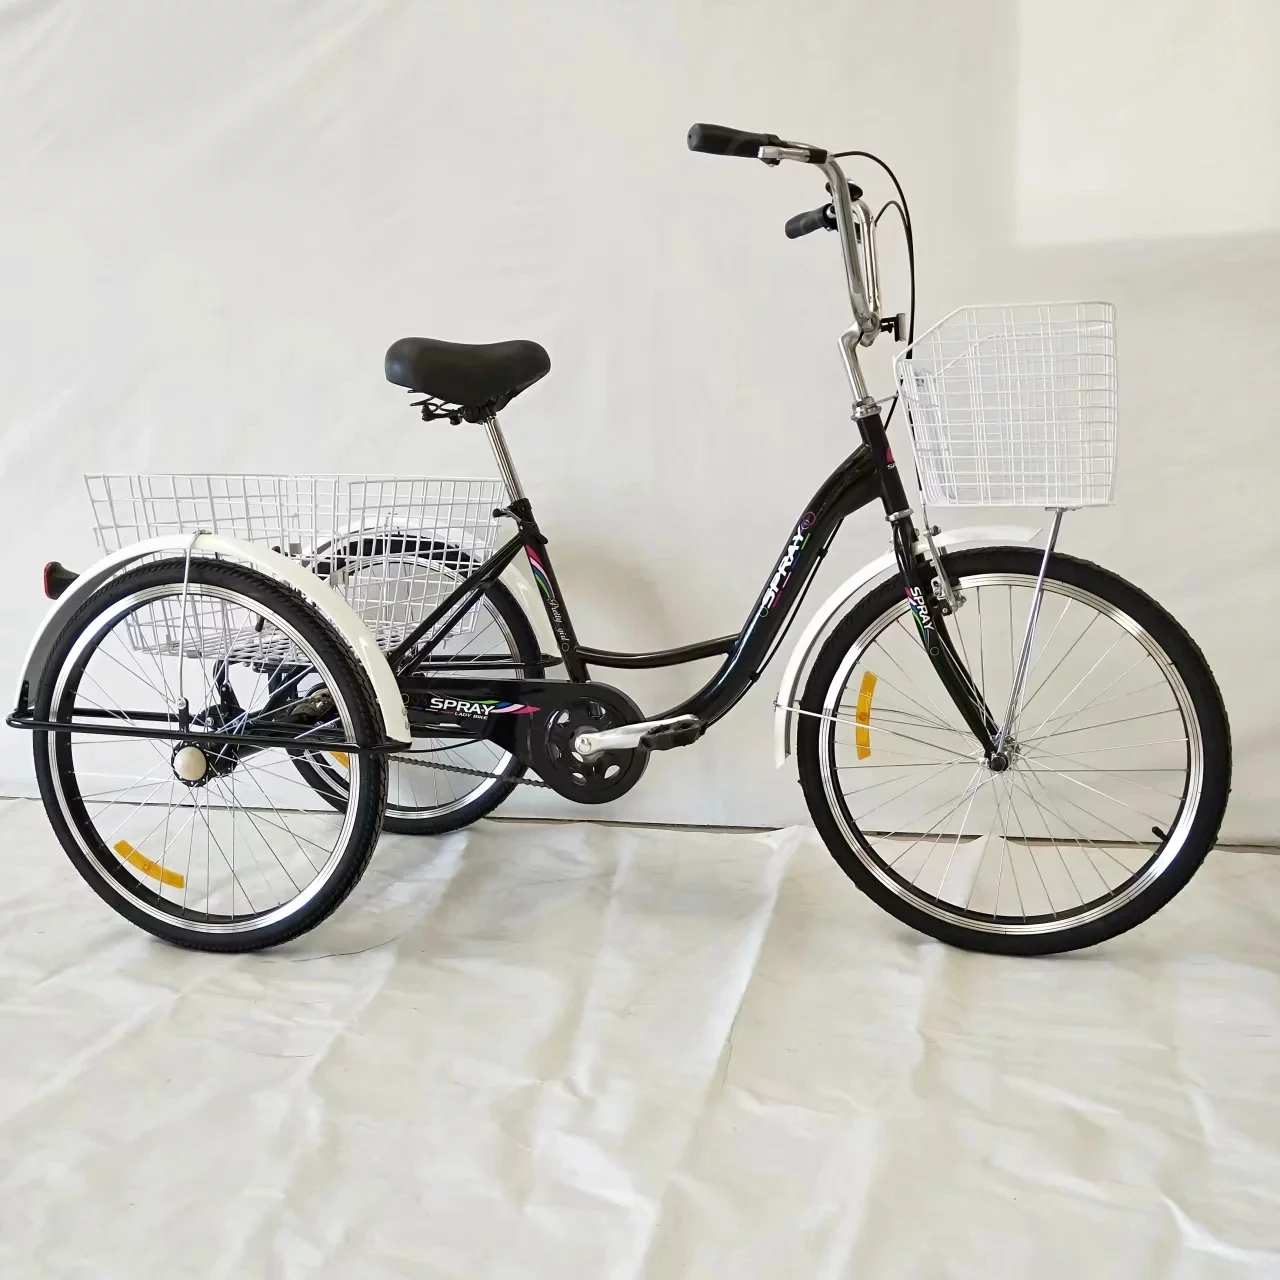 used adult trikes for sale